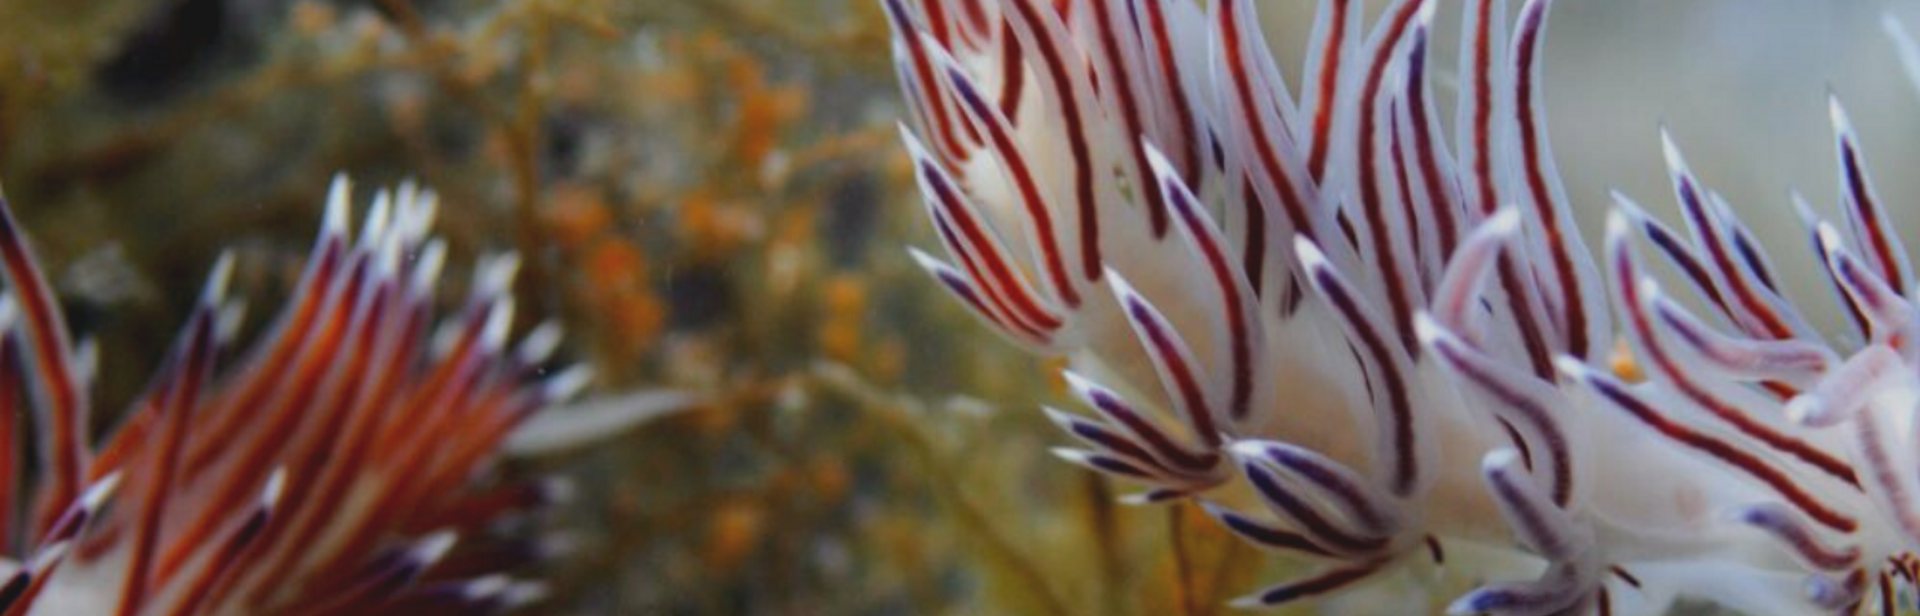 nudibranchs in a coral reef